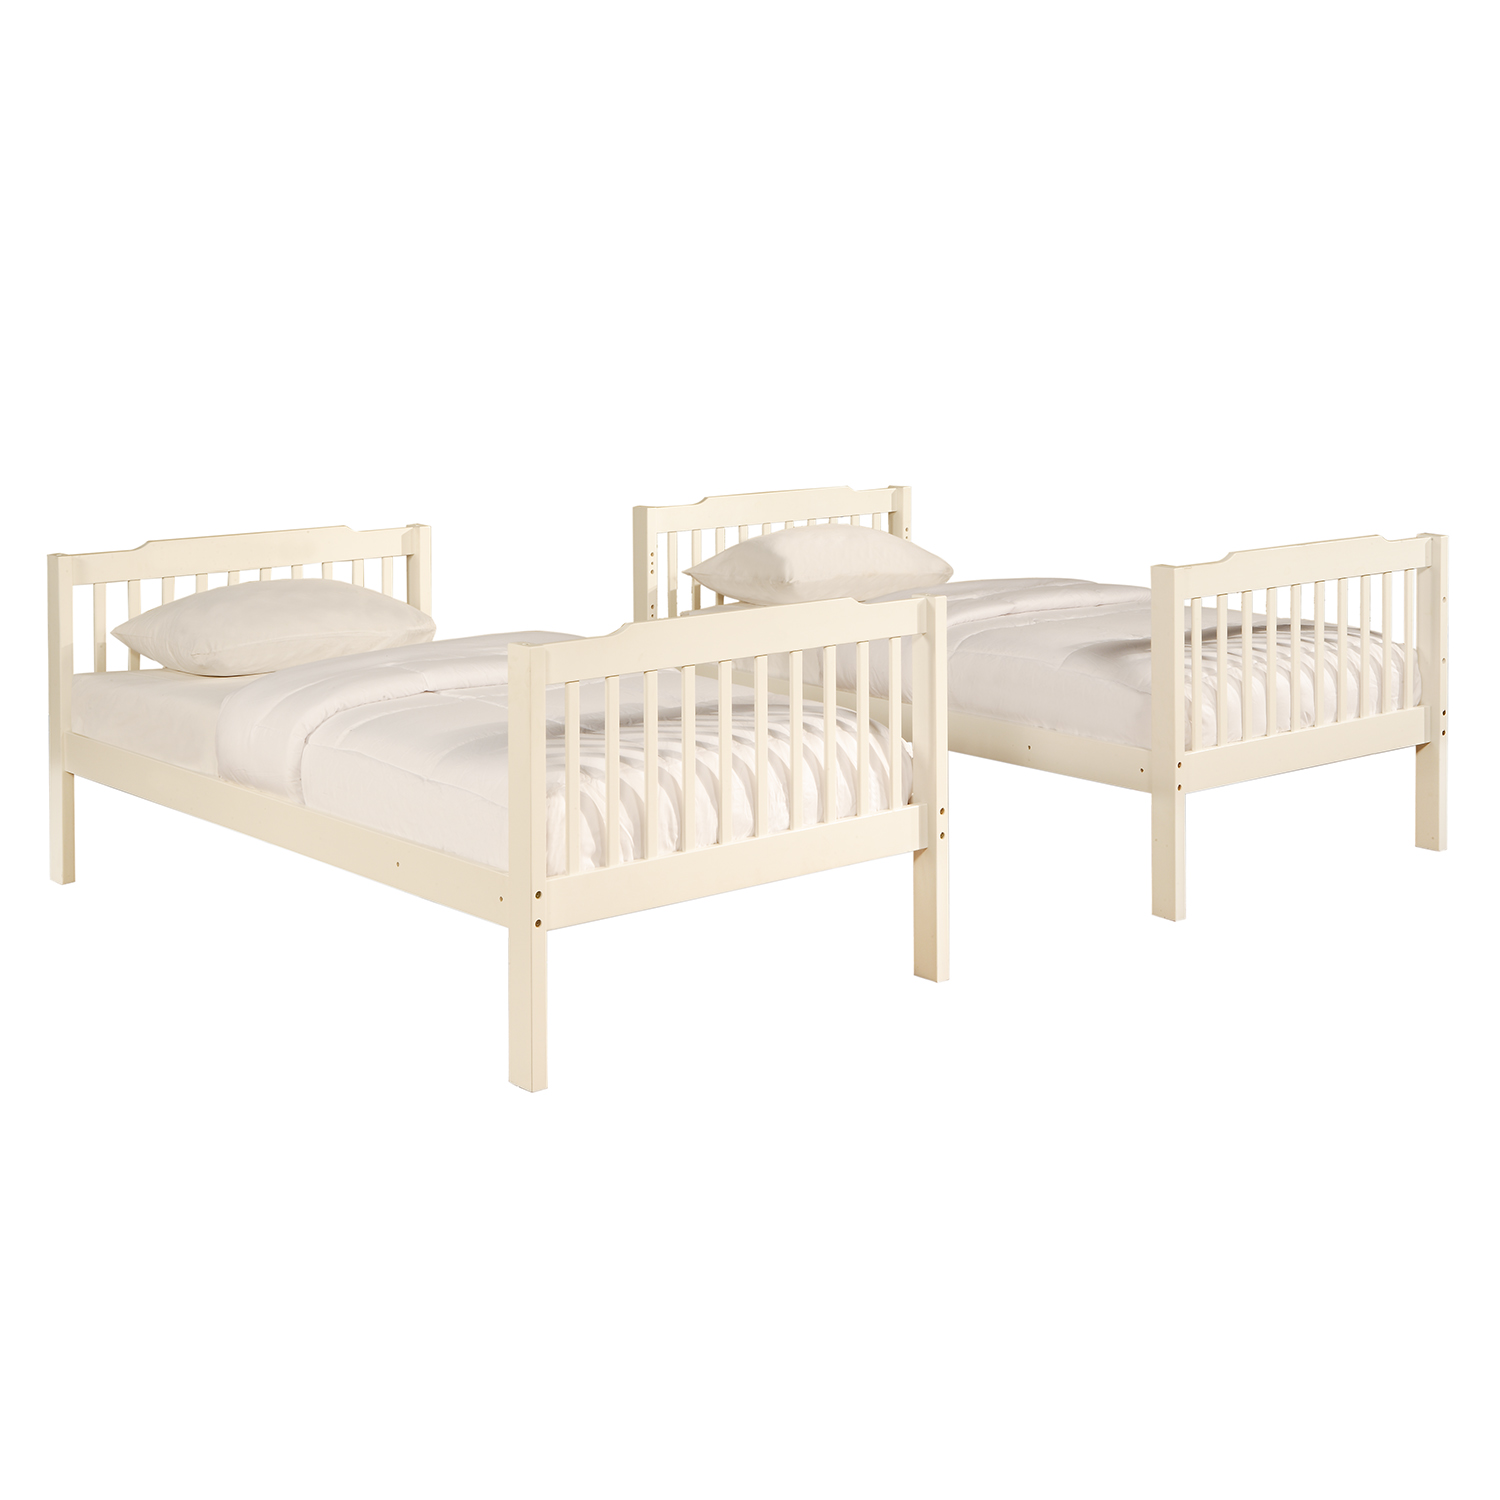 Chelsea Lane Elise Convertible Twin Over Twin Wood Bunk Bed, White - image 3 of 5